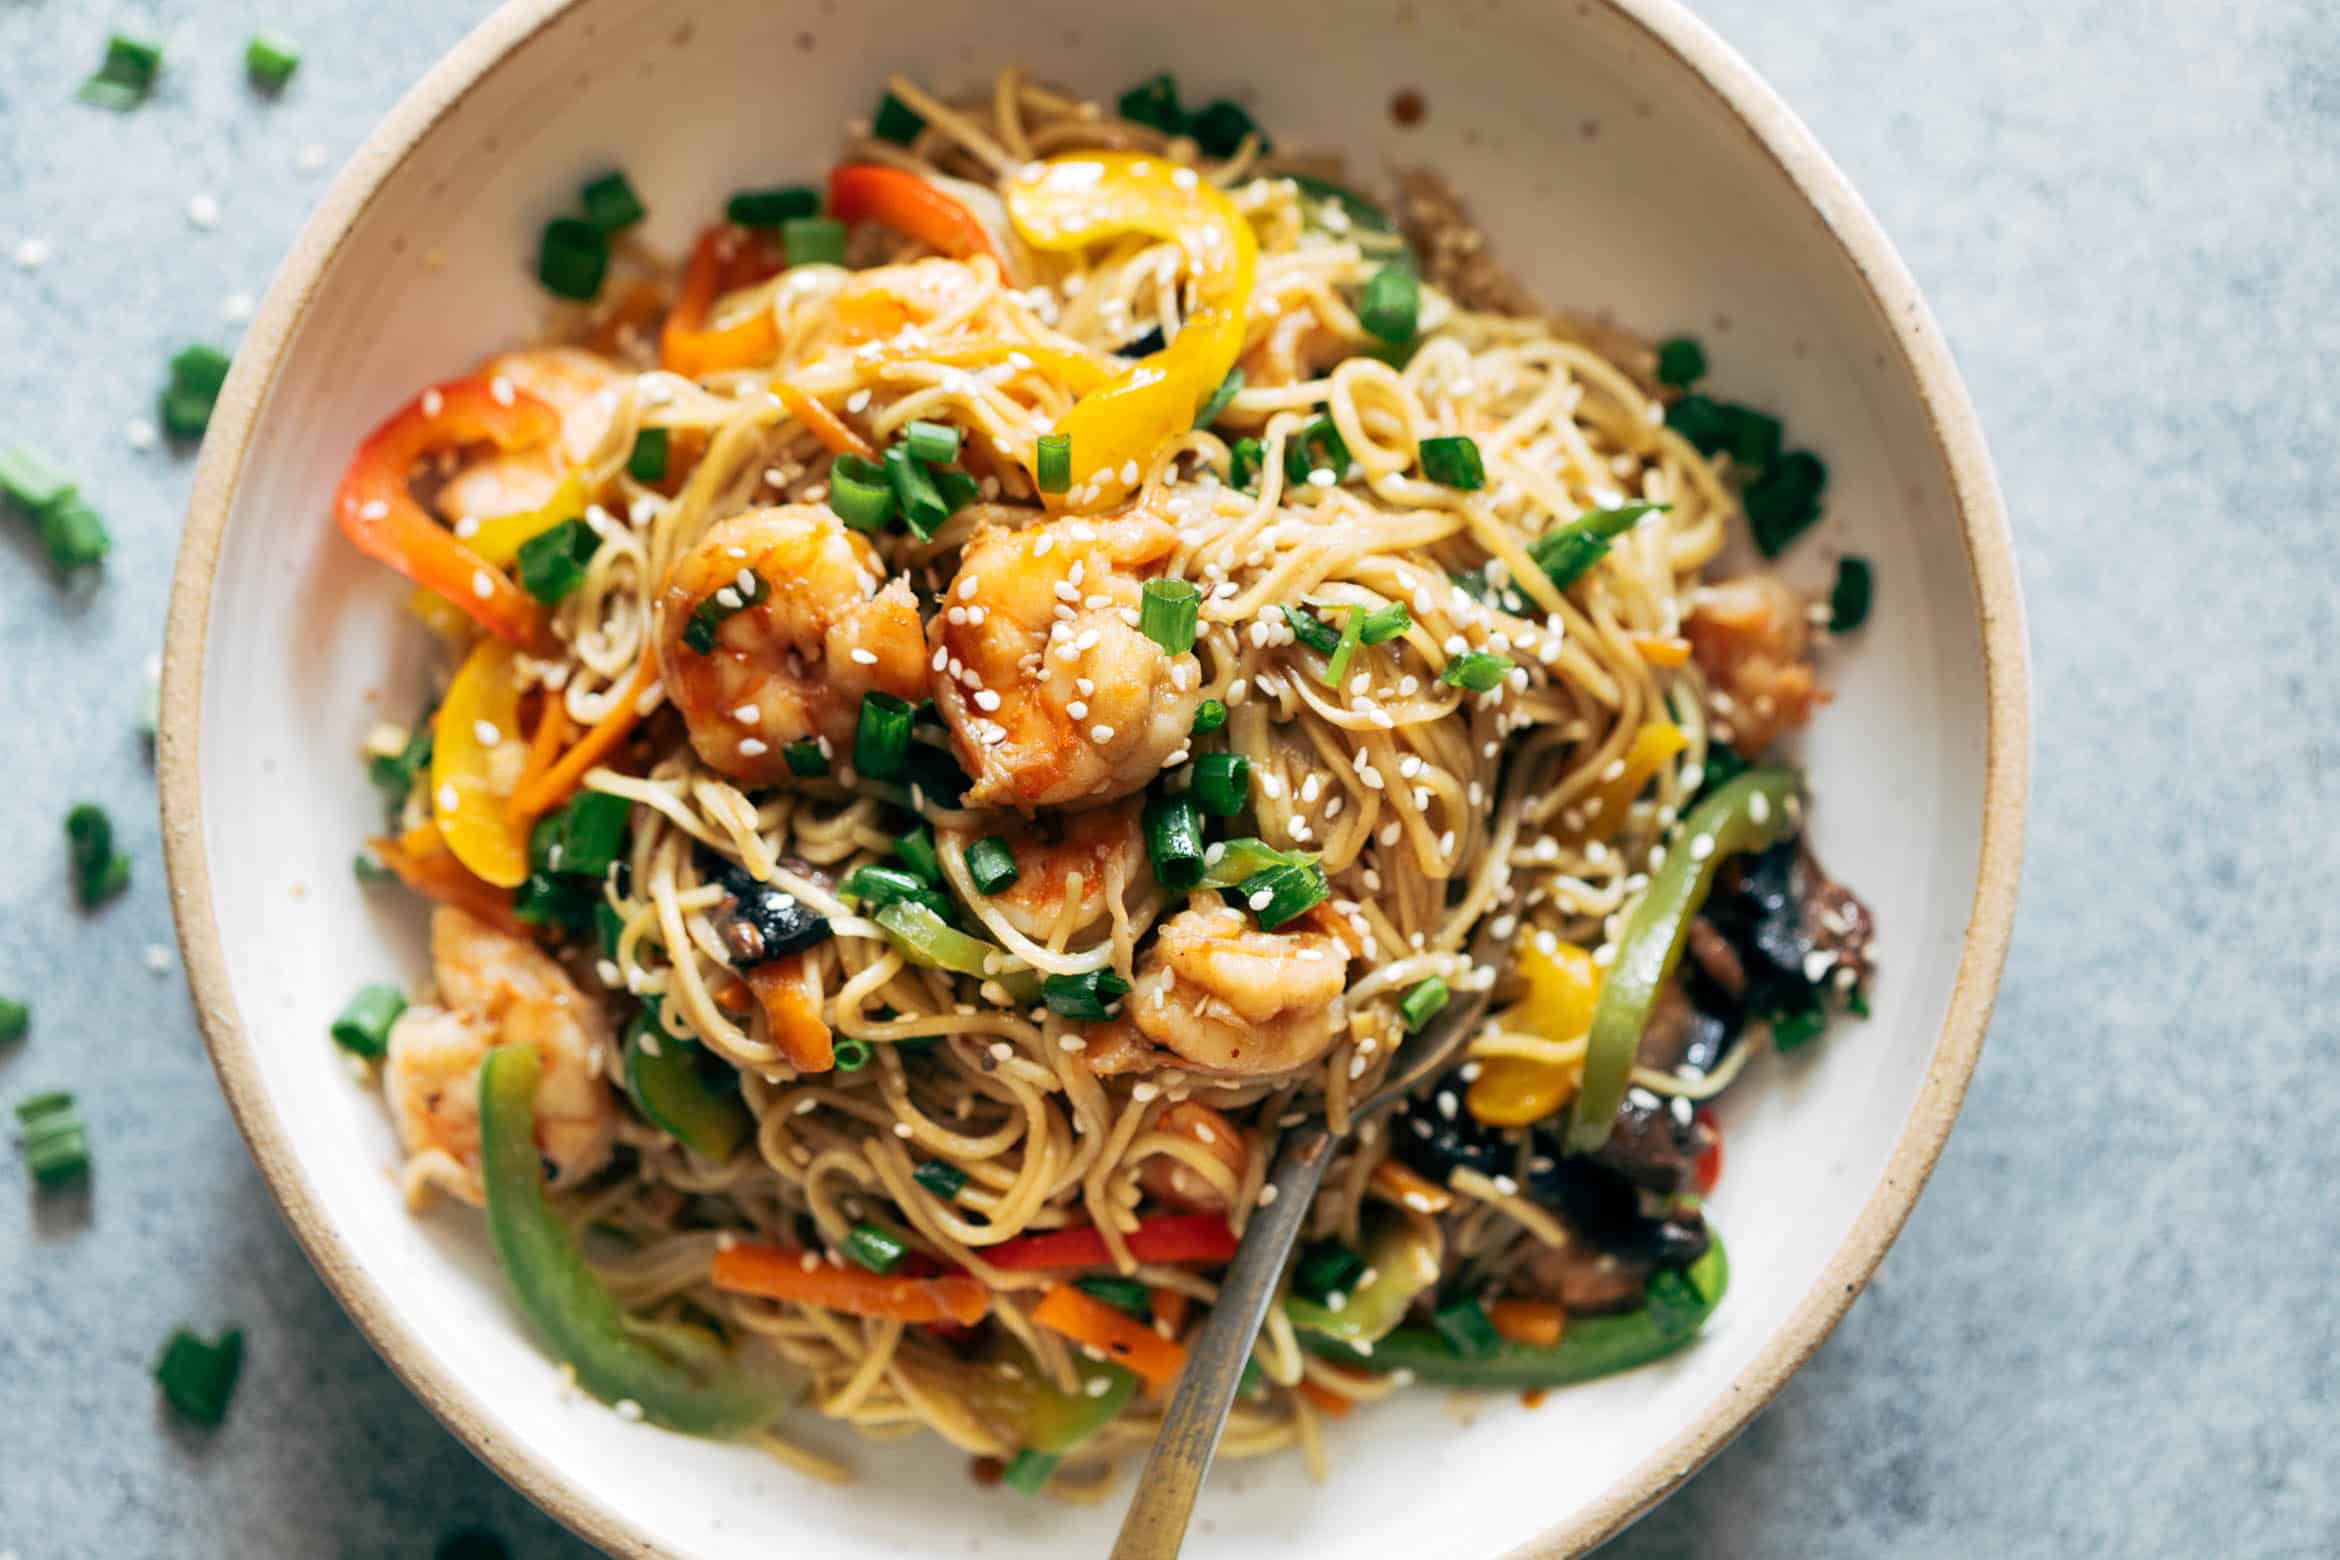 Shrimp Chow Mein is an easy, one pot meal loaded with shrimp, fresh vegetables & flavour. Best weeknight dinner in under 30 minutes and better than takeout!